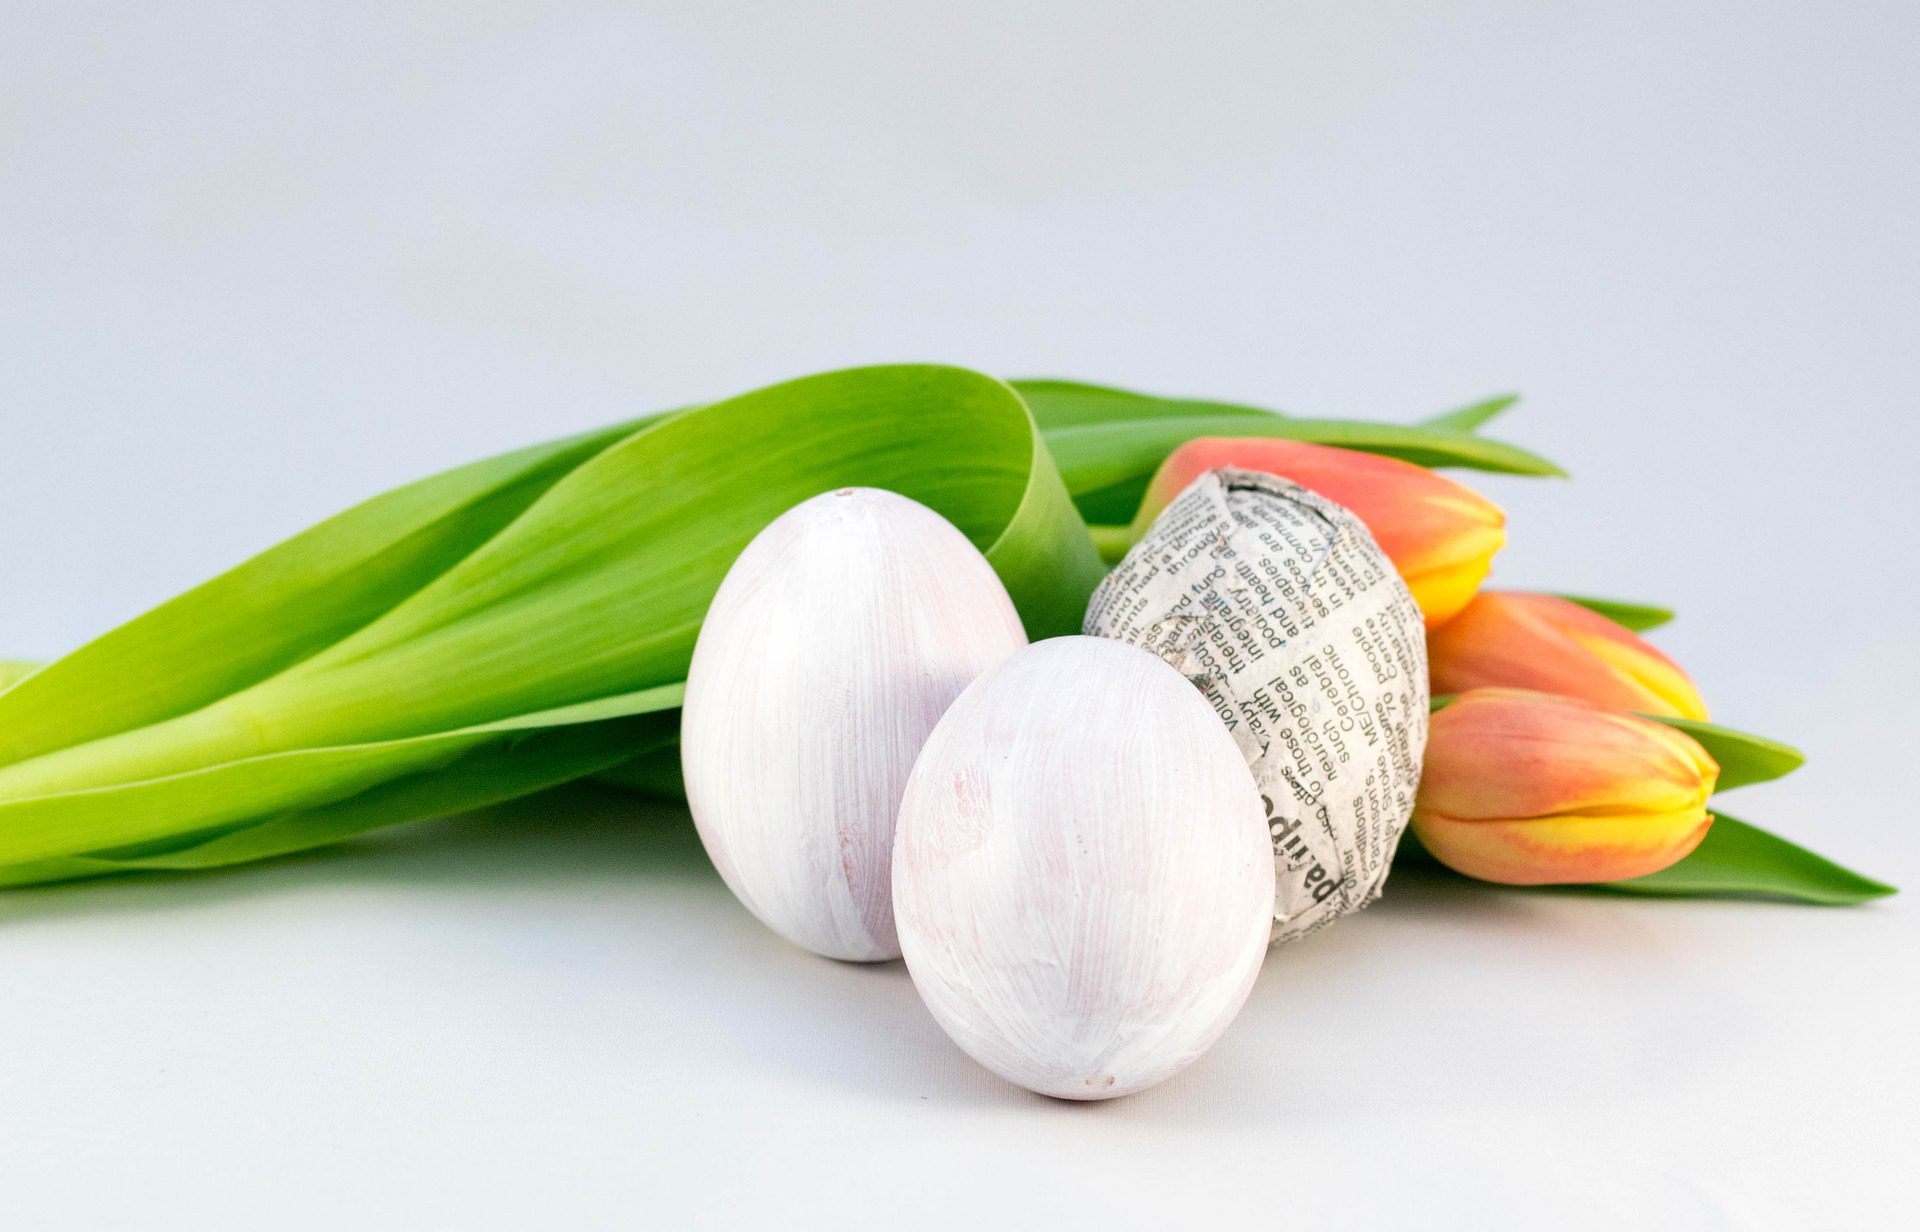 5 ways to get crafty this Easter